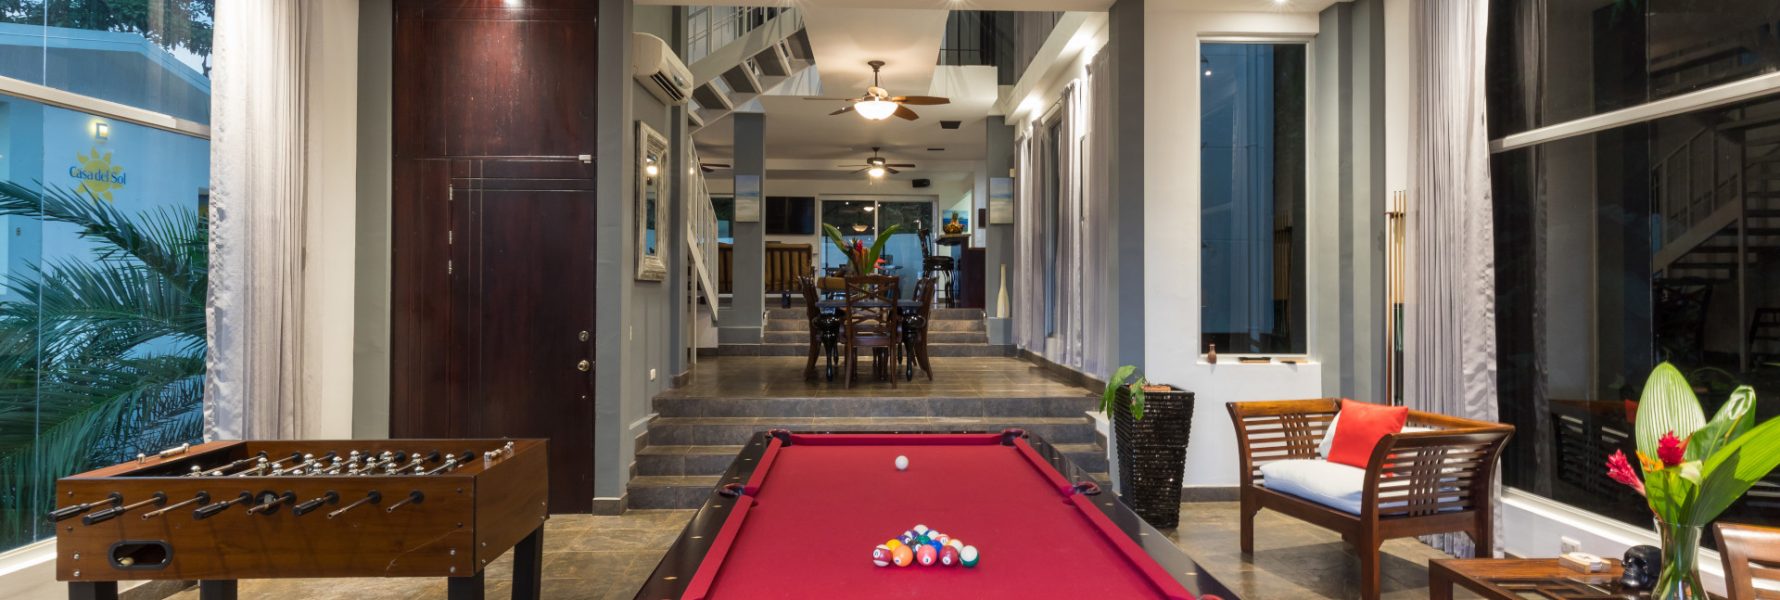 The games room features comfy seating, pool table, foosball table, and a breathtaking view.